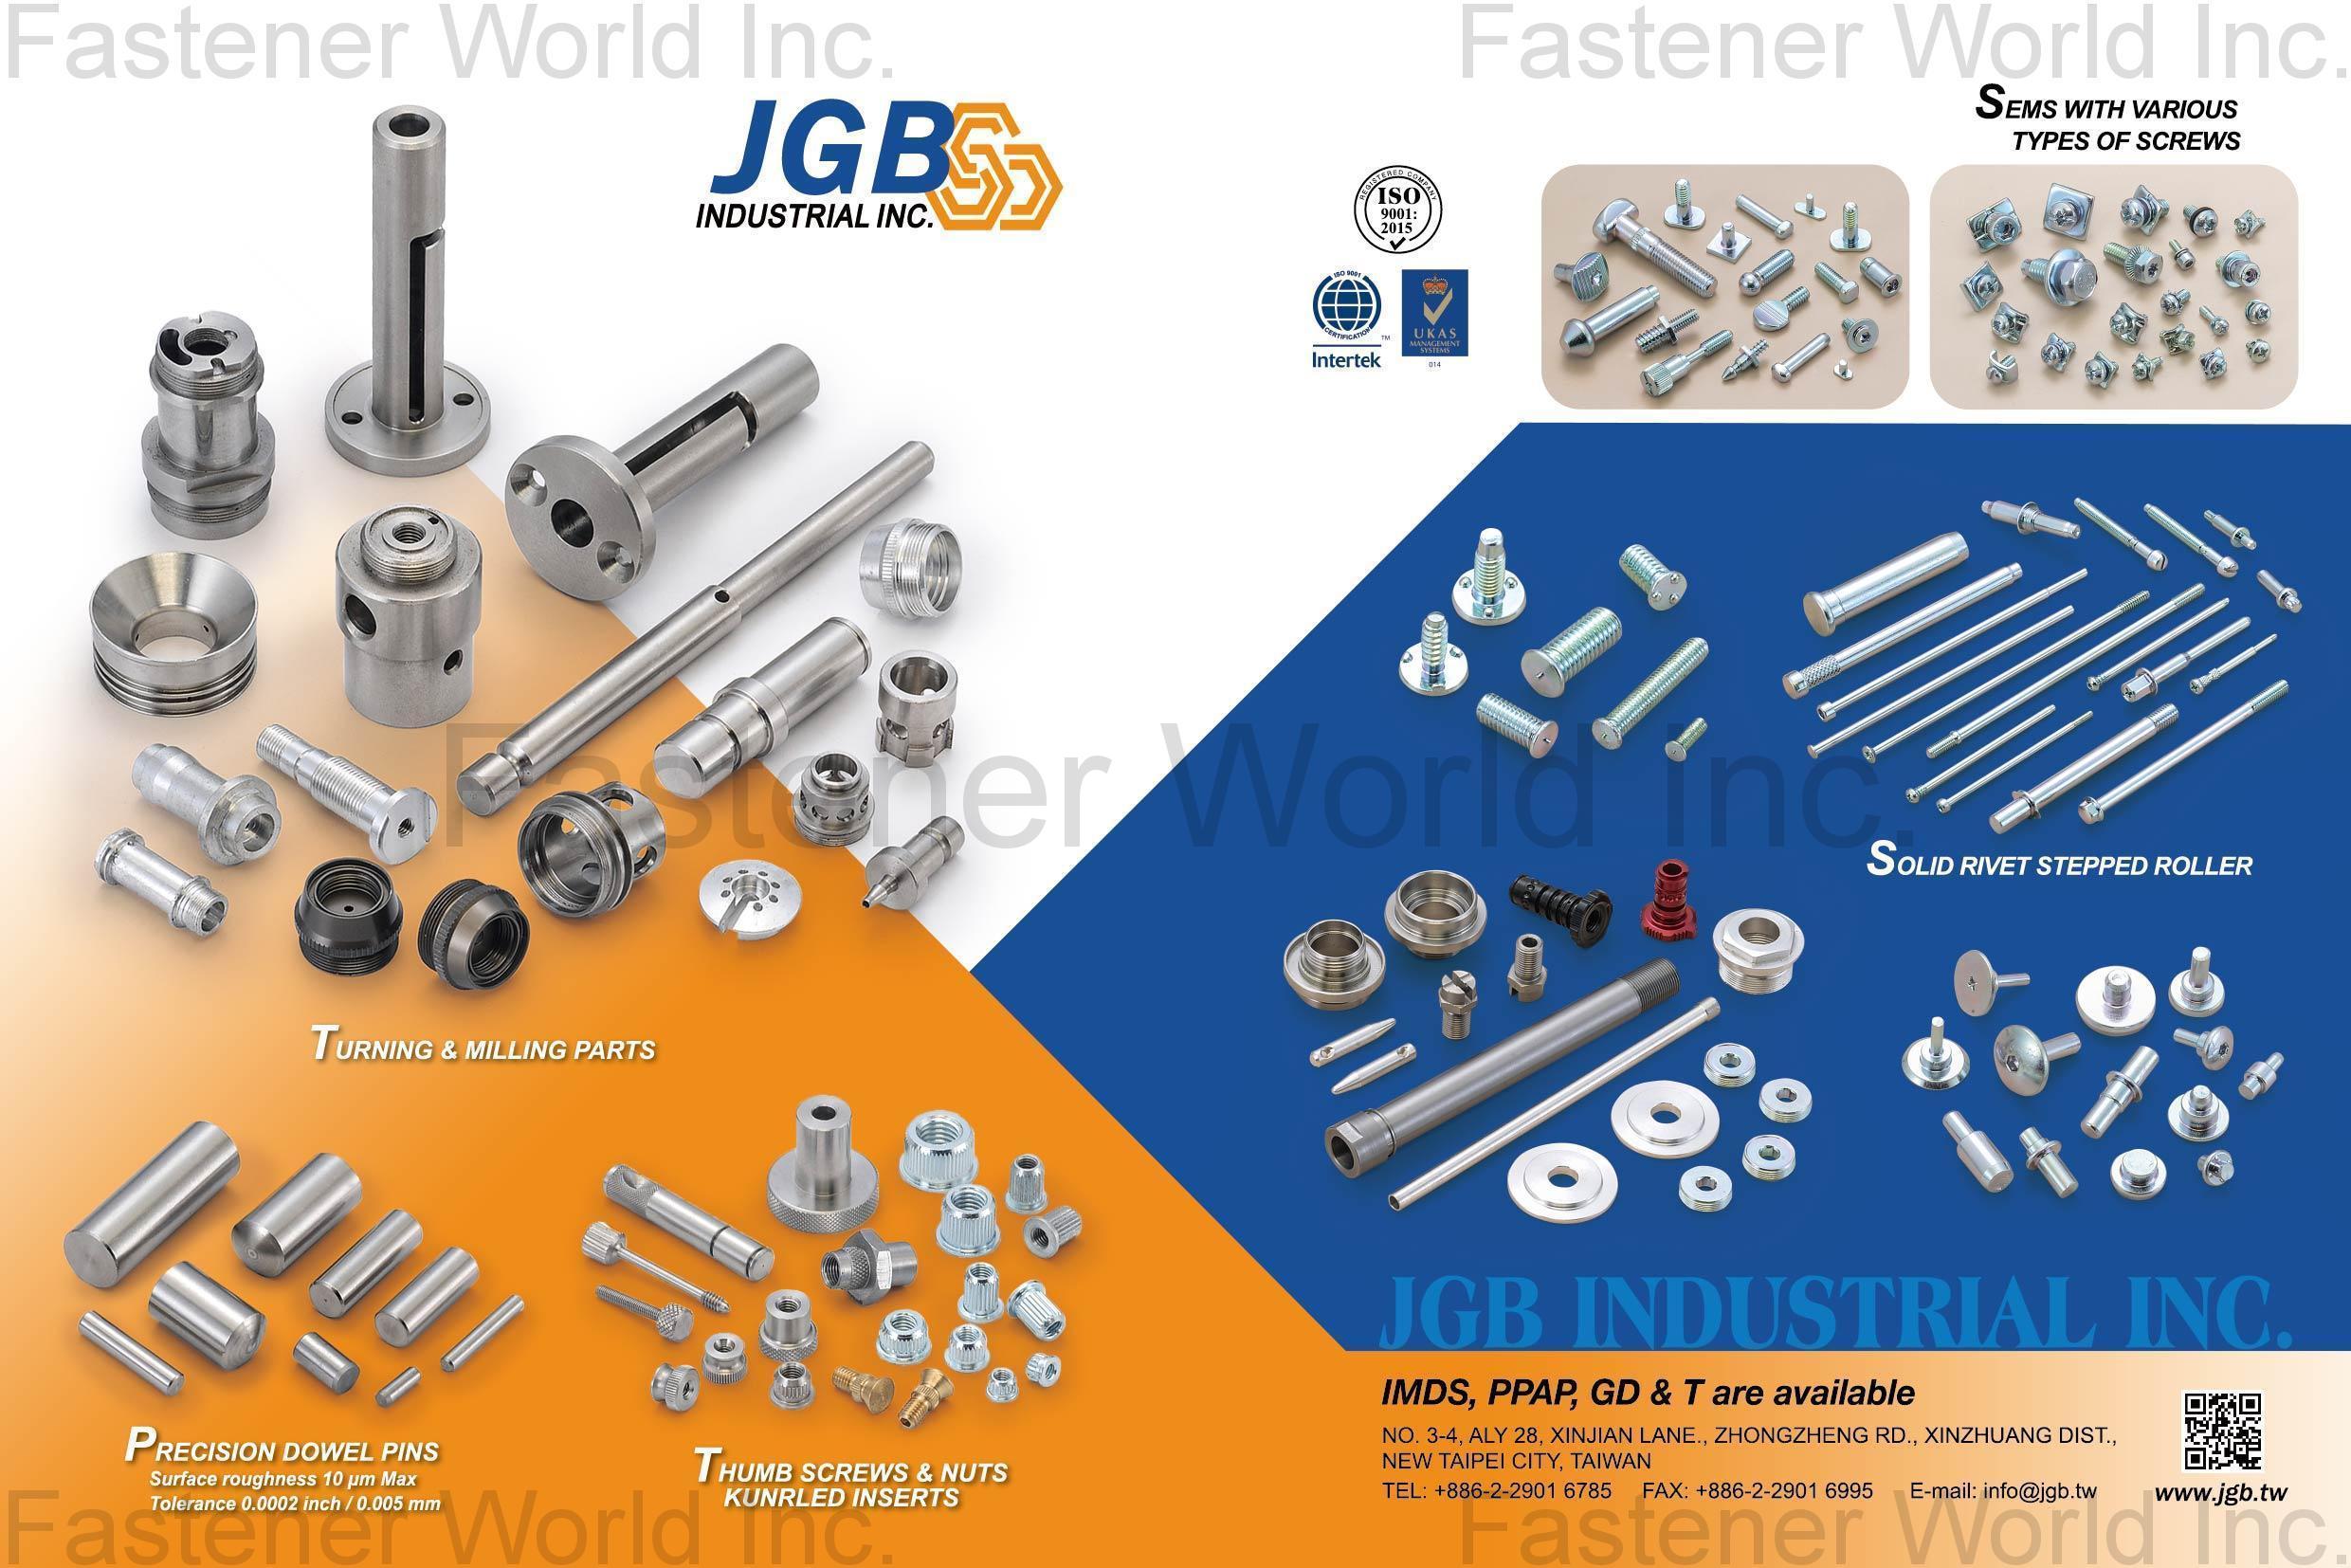 JGB INDUSTRIAL INC. , Turning & Milling Parts, Precision Dowel Pins, Sems with Various Types of Screws, Thumb Screws & Nuts, Knurled Inserts, Solid Rivet Stepped Roller , Turning Parts